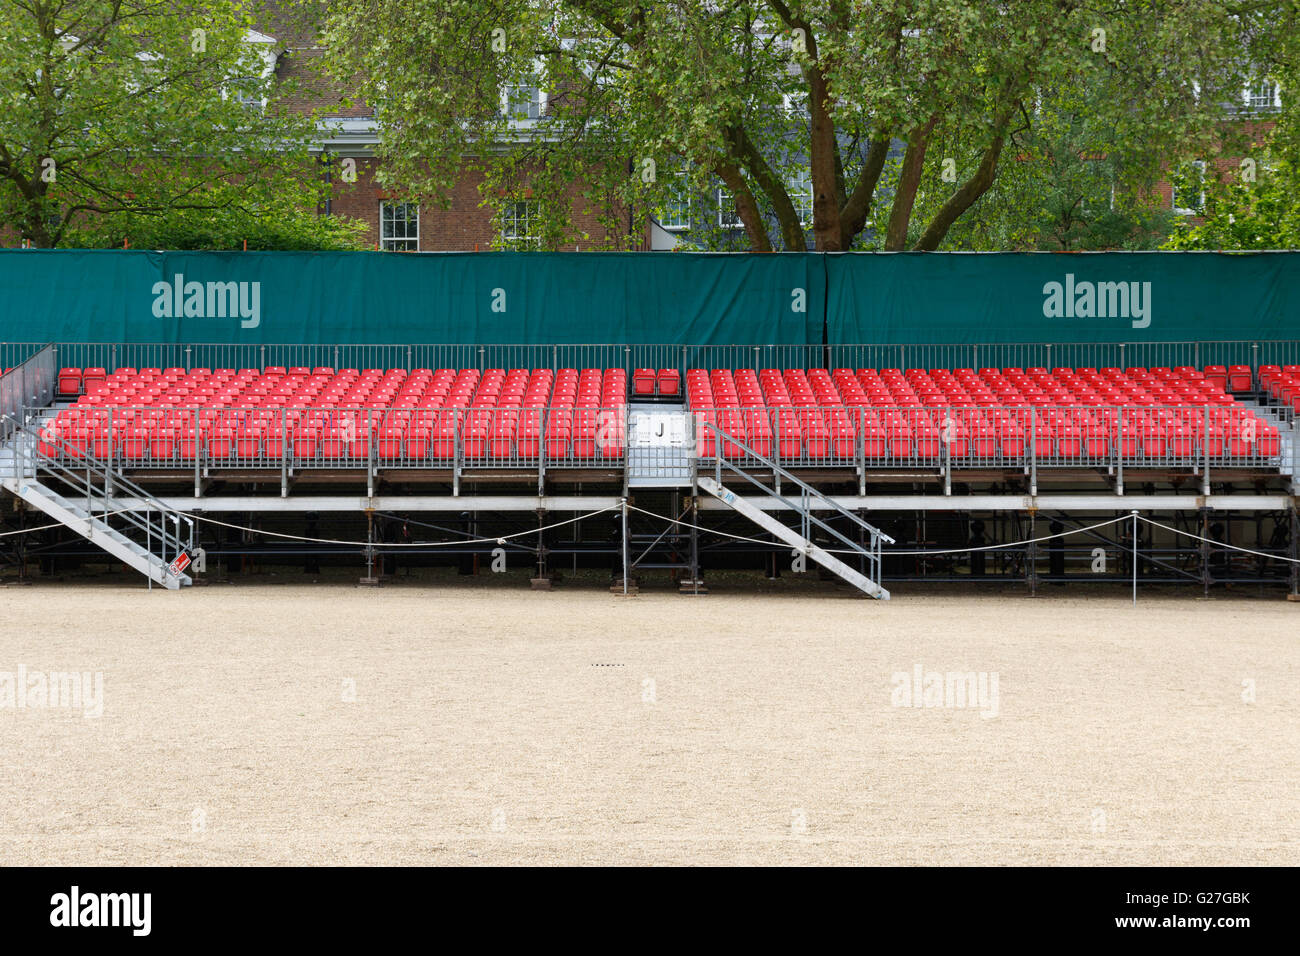 Temporary raked red spectator seating for an outdoor event Stock Photo